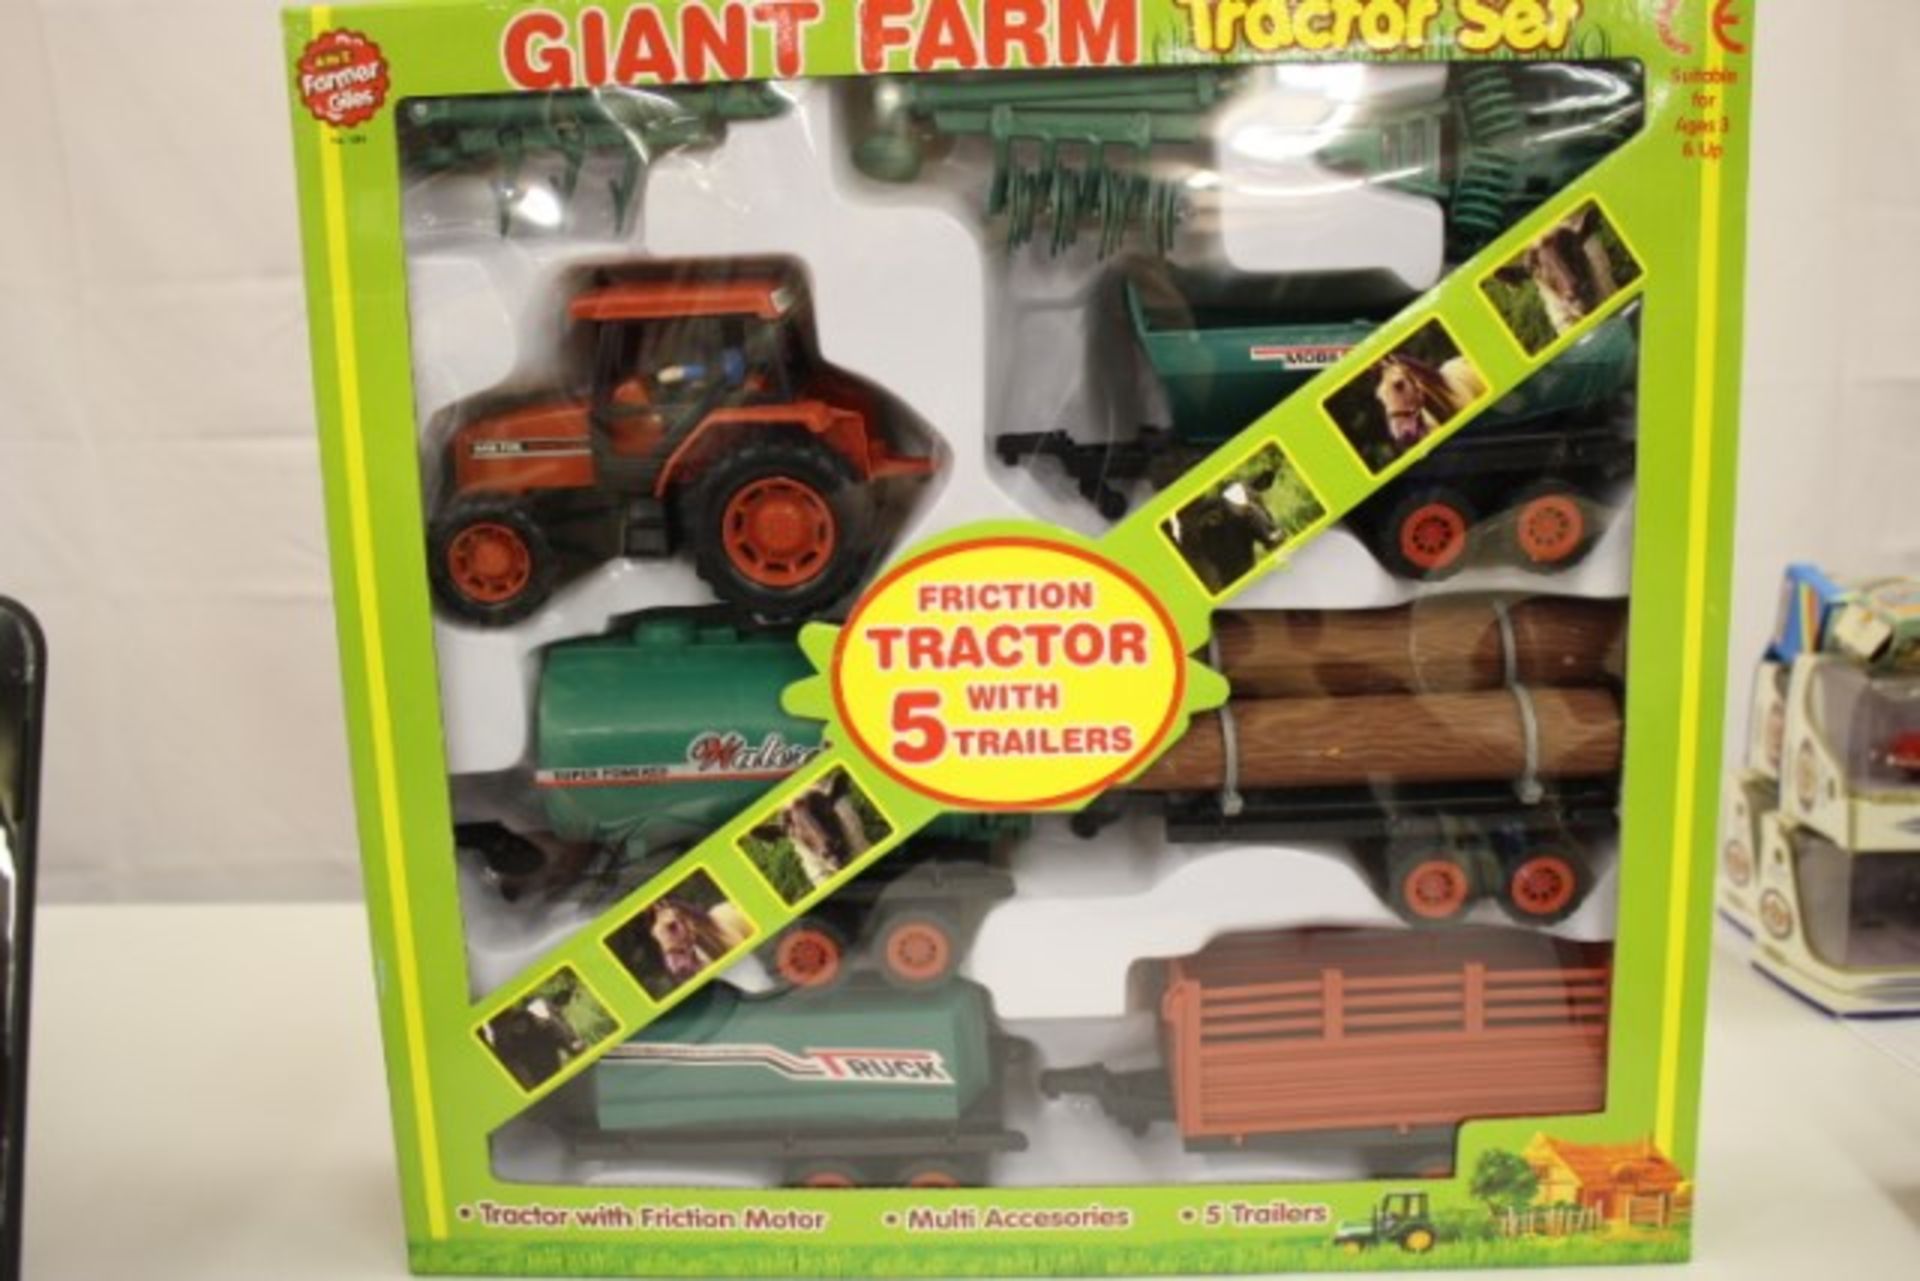 V Brand New Giant Farm Tractor Set SRP £19.99 X 2 Bid price to be multiplied by Two